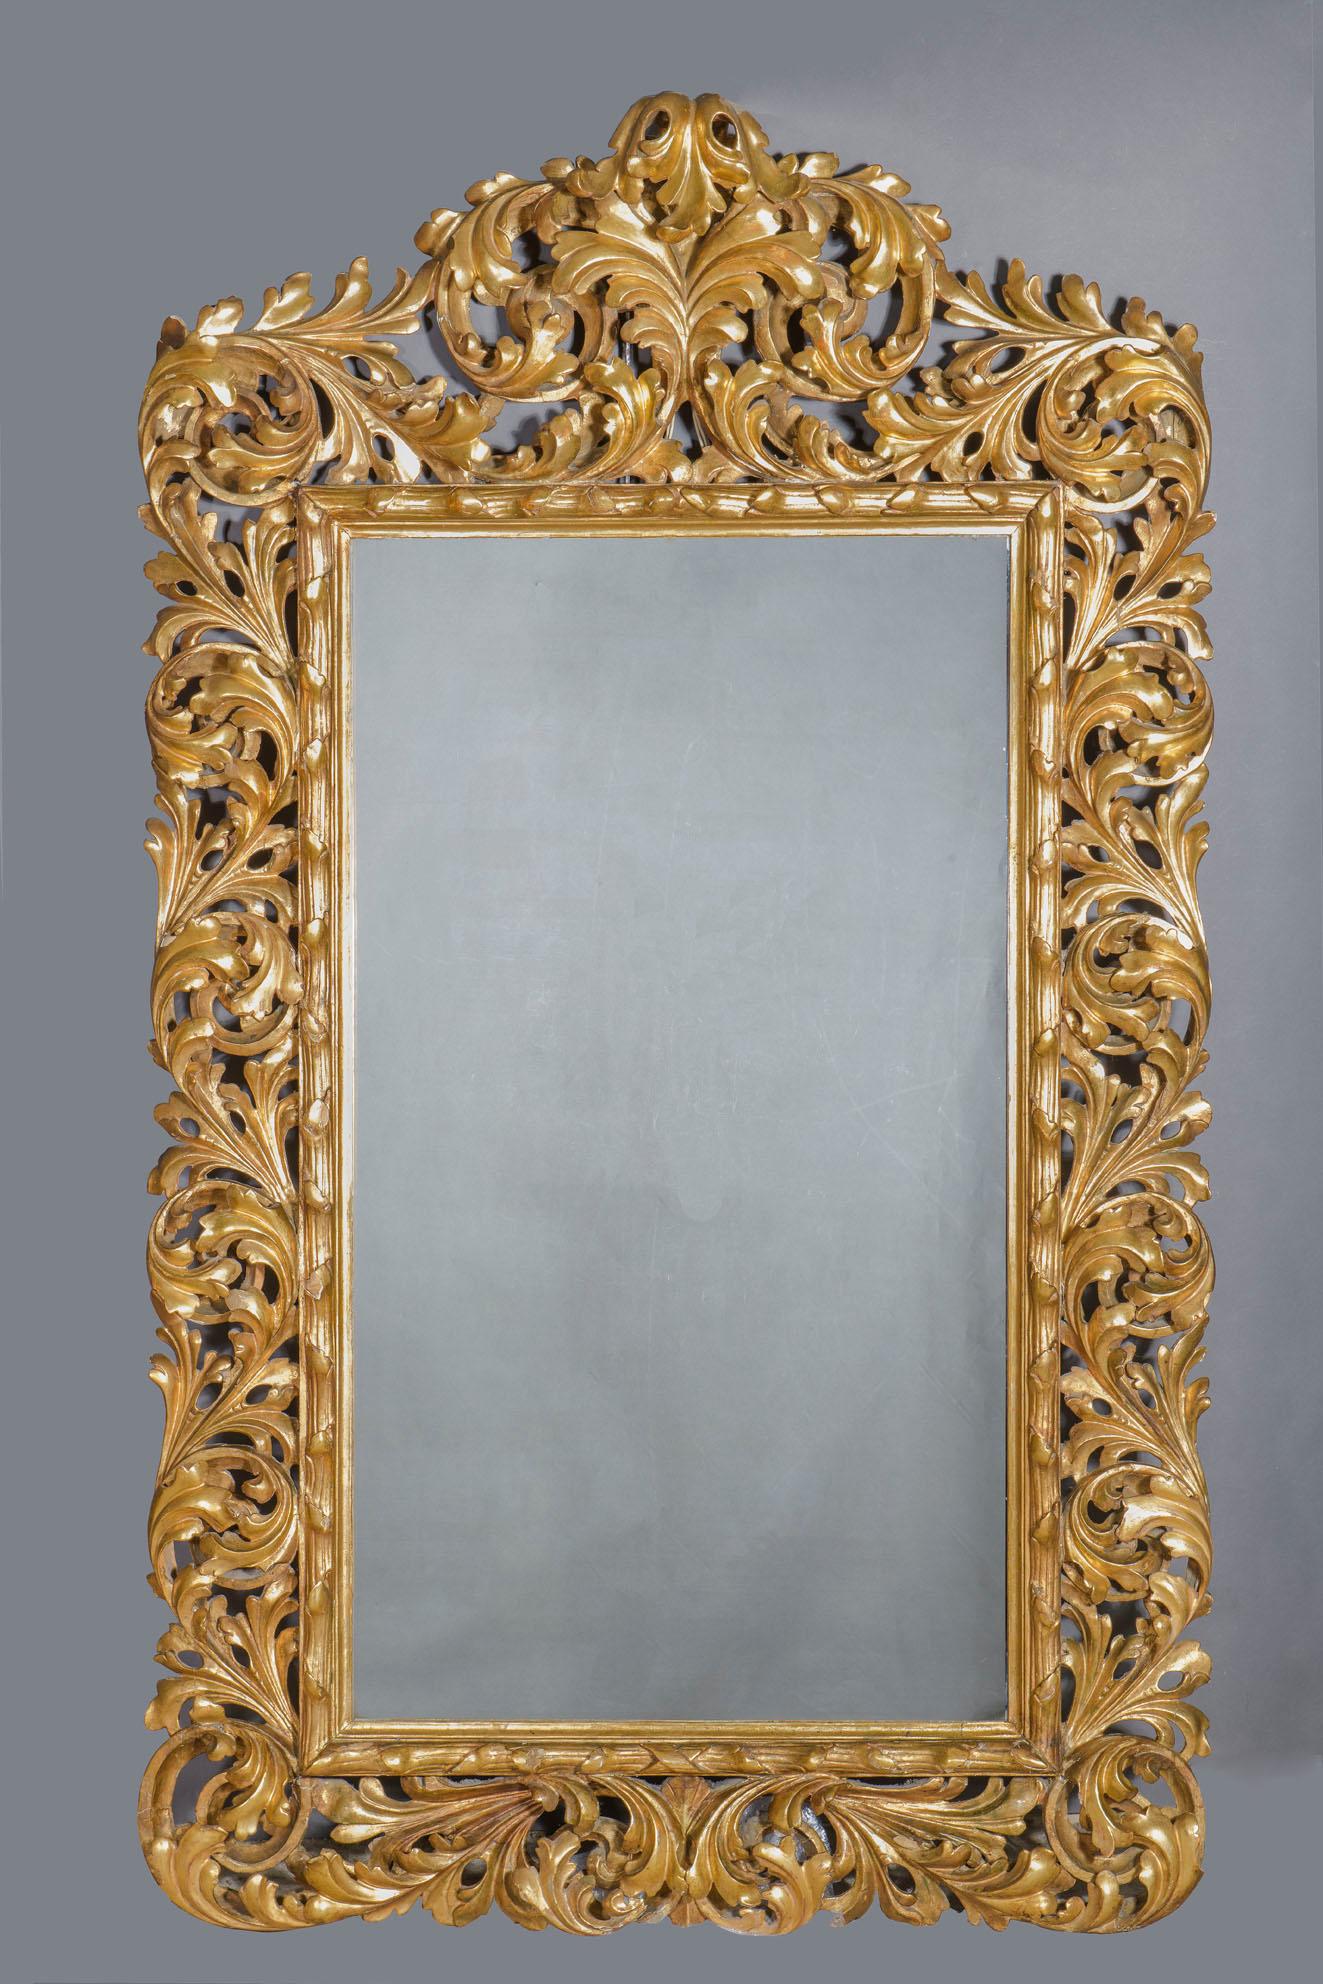 Wonderful, important Baroque frame in wood gilded with pure gold.
Richly carved with acanthus leaf volutes, it represents in the highest degree the skill of Italian master carvers.
In particular, given the very high quality of the workmanship, we